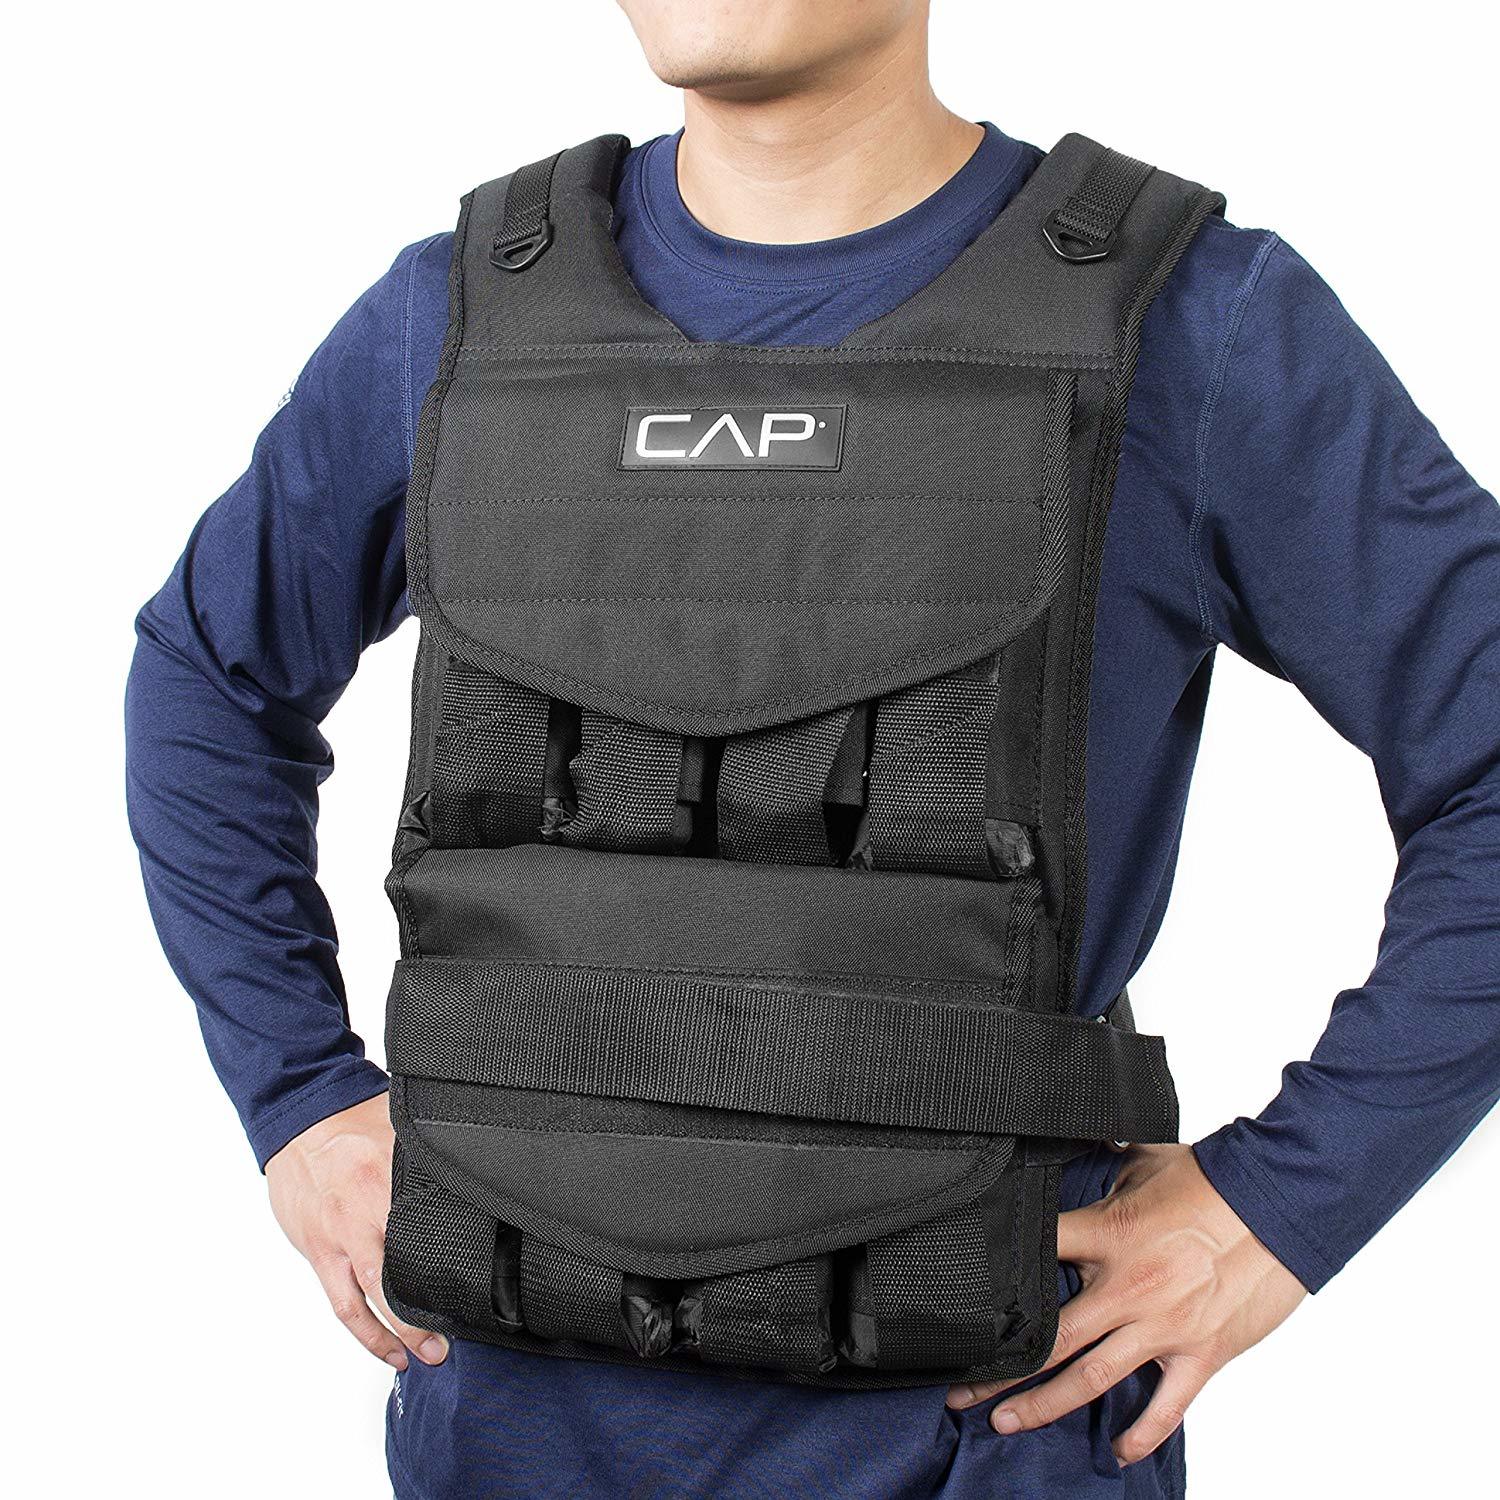 4 best weighted vests for running and crossfit that will change the way U train 8